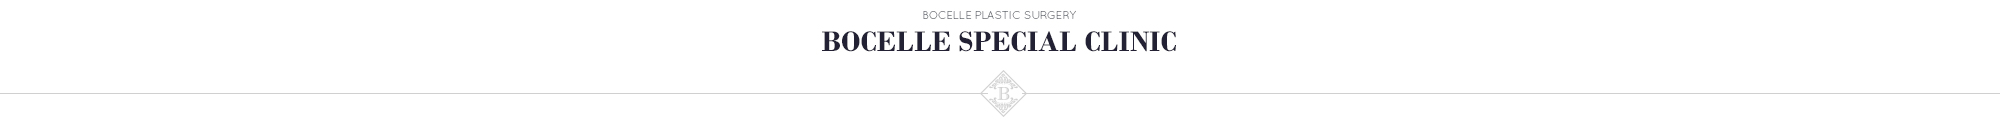 bocelle special clinic